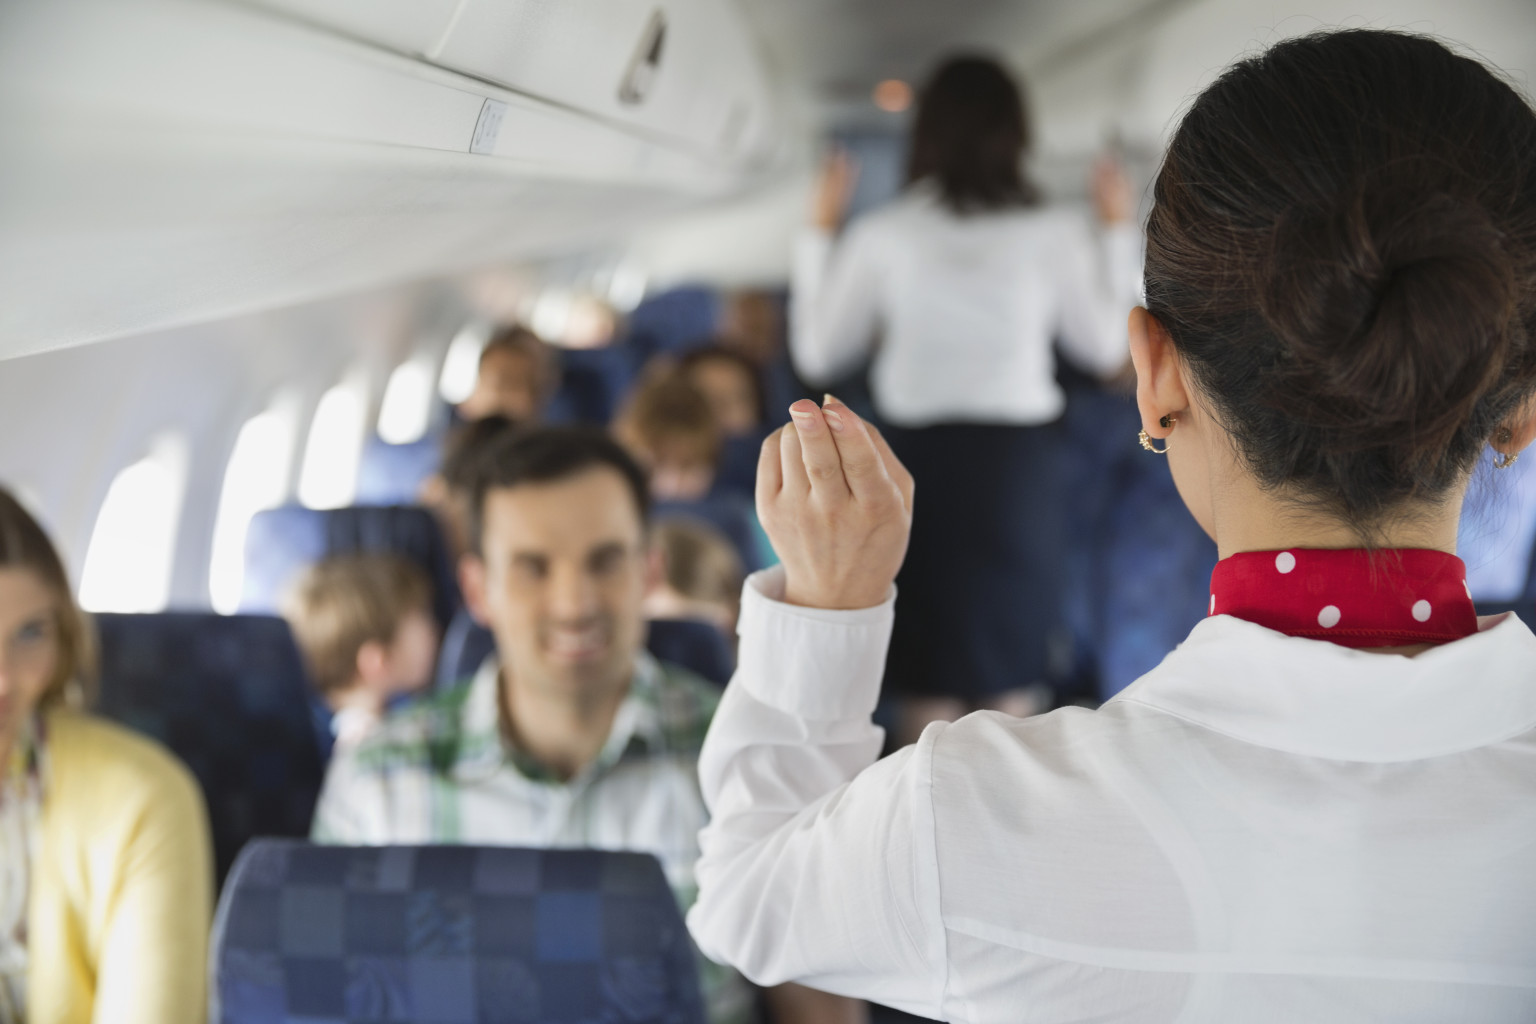 4 Airplane Safety Tips You Wont Learn From the Demo | SafeBee